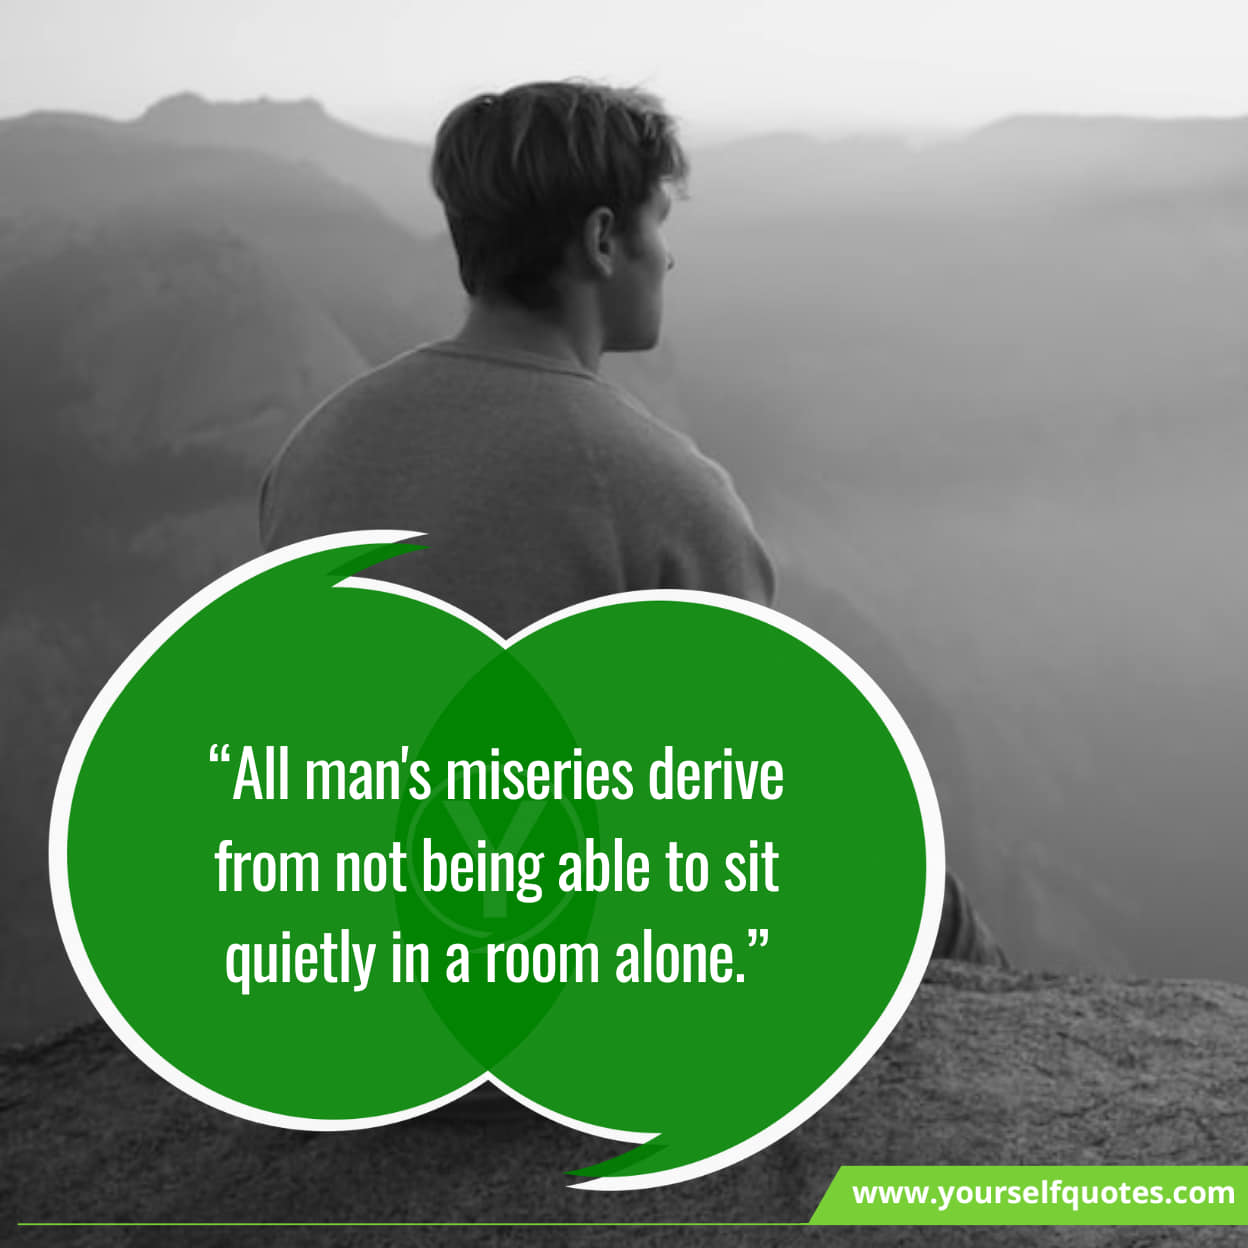 Quotes about finding peace in solitude